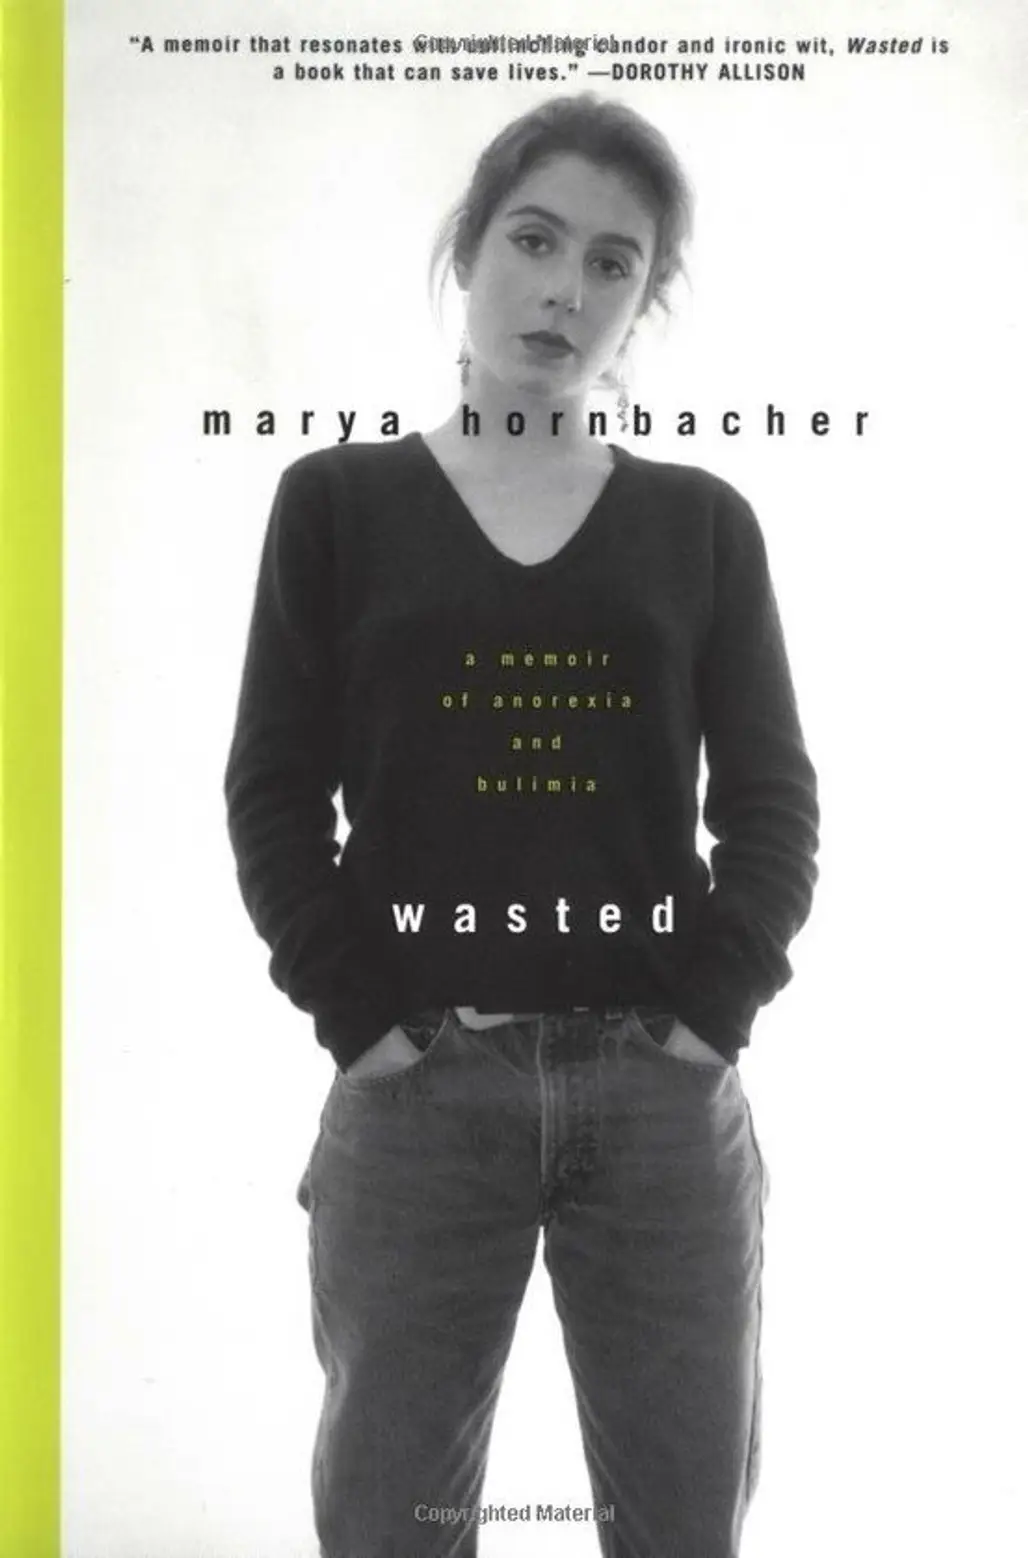 “Wasted: a Memoir of Anorexia and Bulimia”